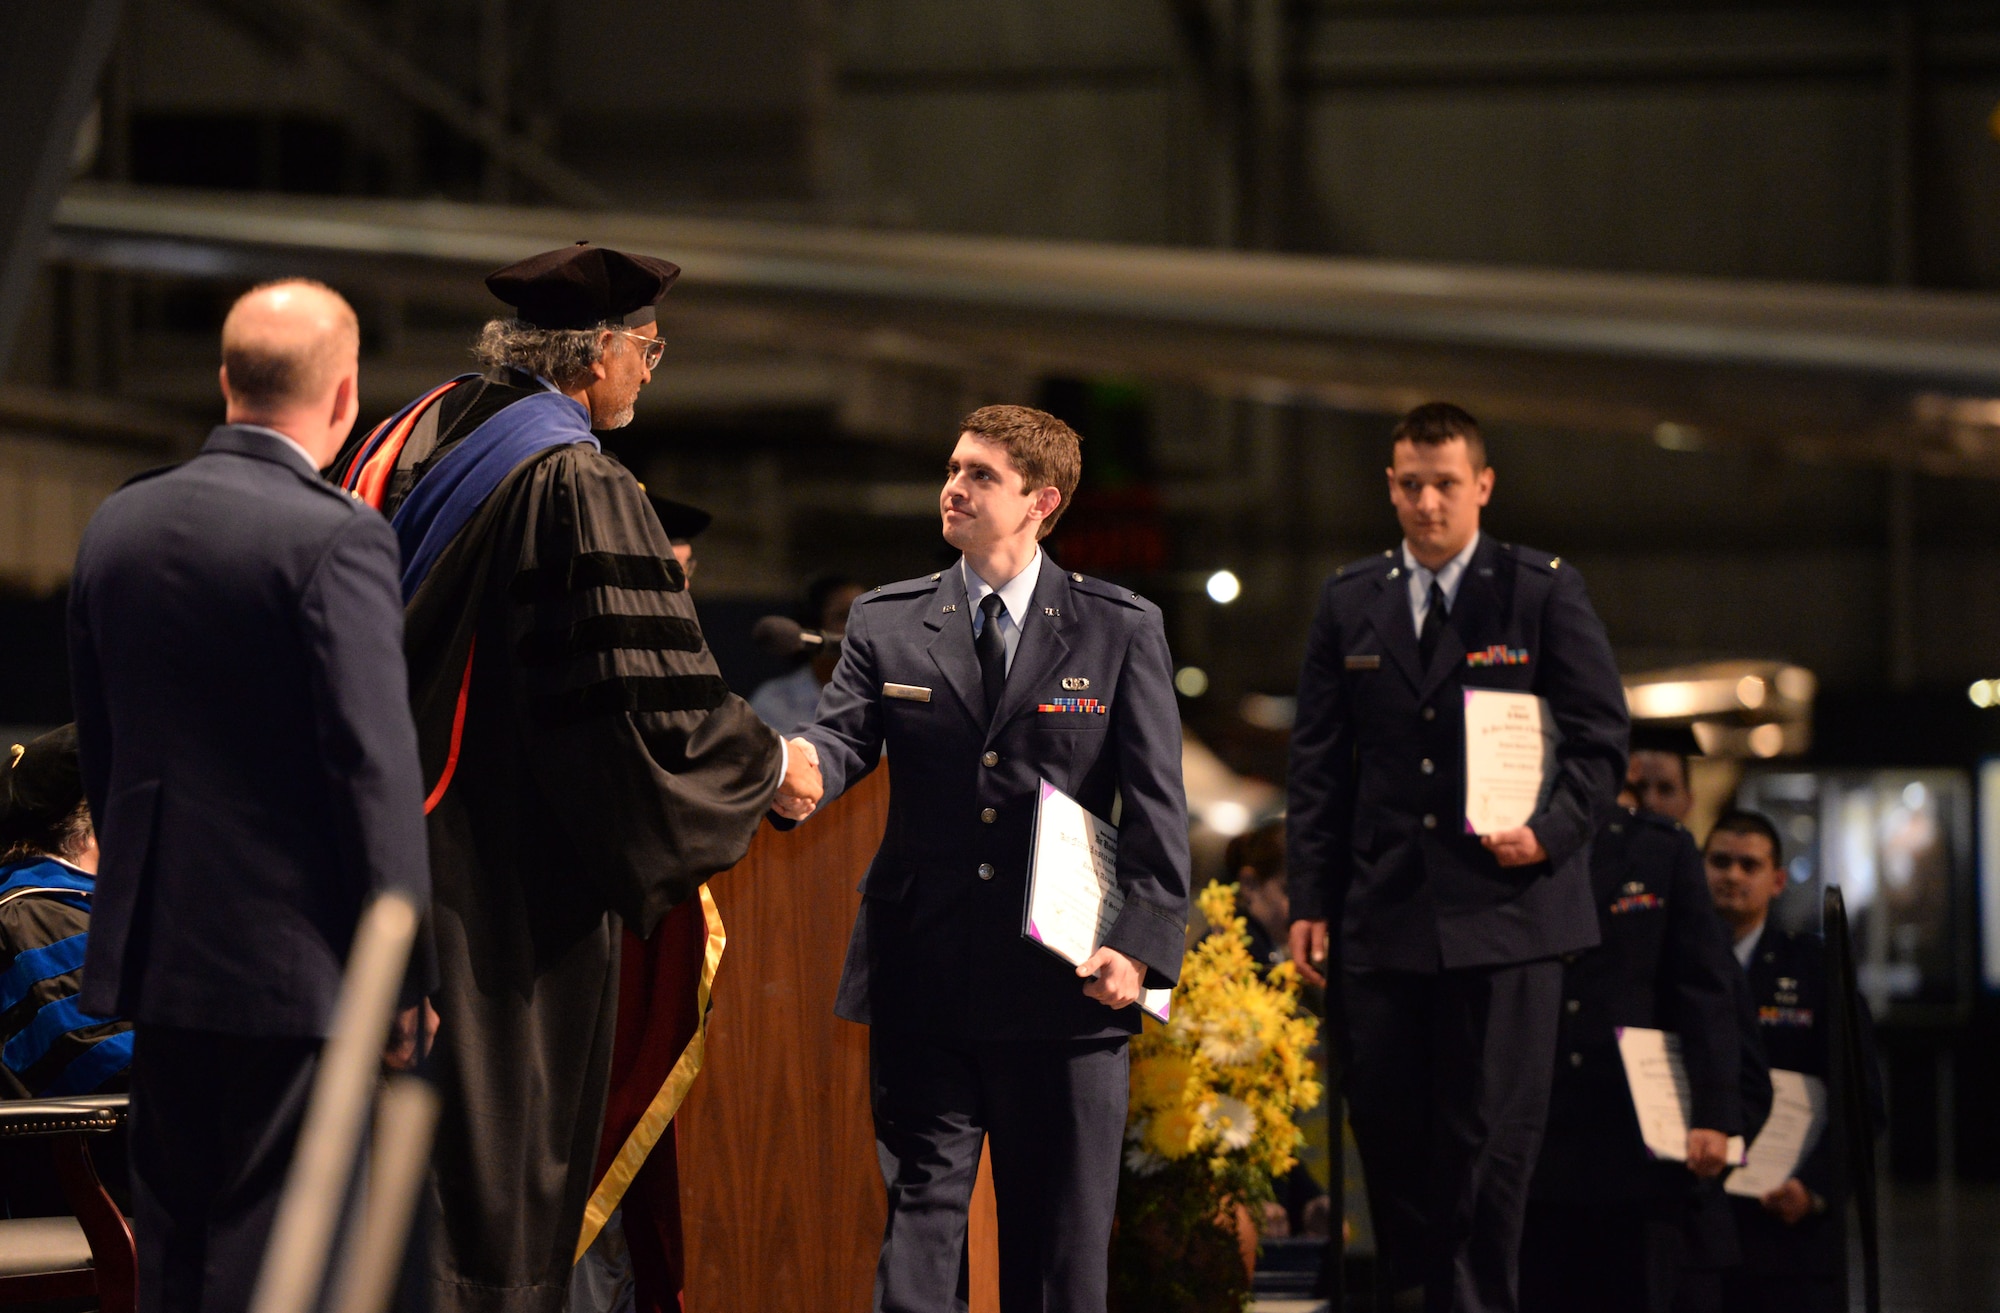 Graduates line up to receive their diplomas during the Air Force Institute of Technology Commencement Ceremony March 24, 2016 at the National Museum of United States Air Force. AFIT is committed to graduate instructional and research programs in science technology, engineering, and mathematics areas. (U.S. Air Force photo by Michelle Gigante)